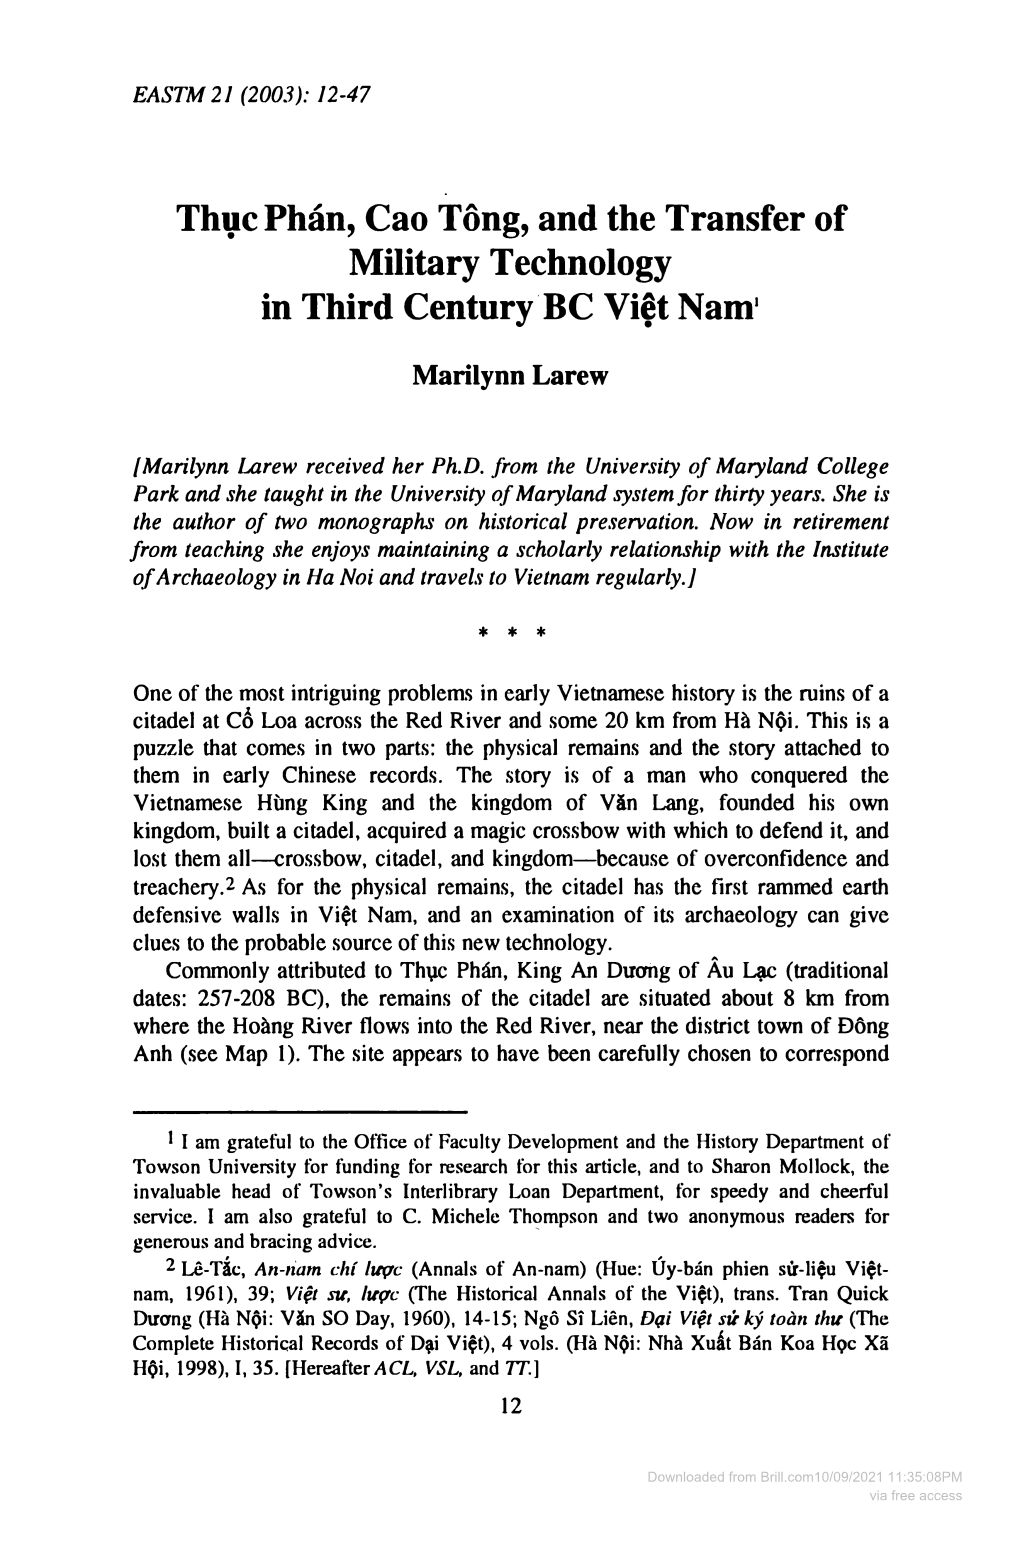 Thyc Phan, Cao Tong, and the Transfer of Military Technology in Third Century BC Vift Nam•